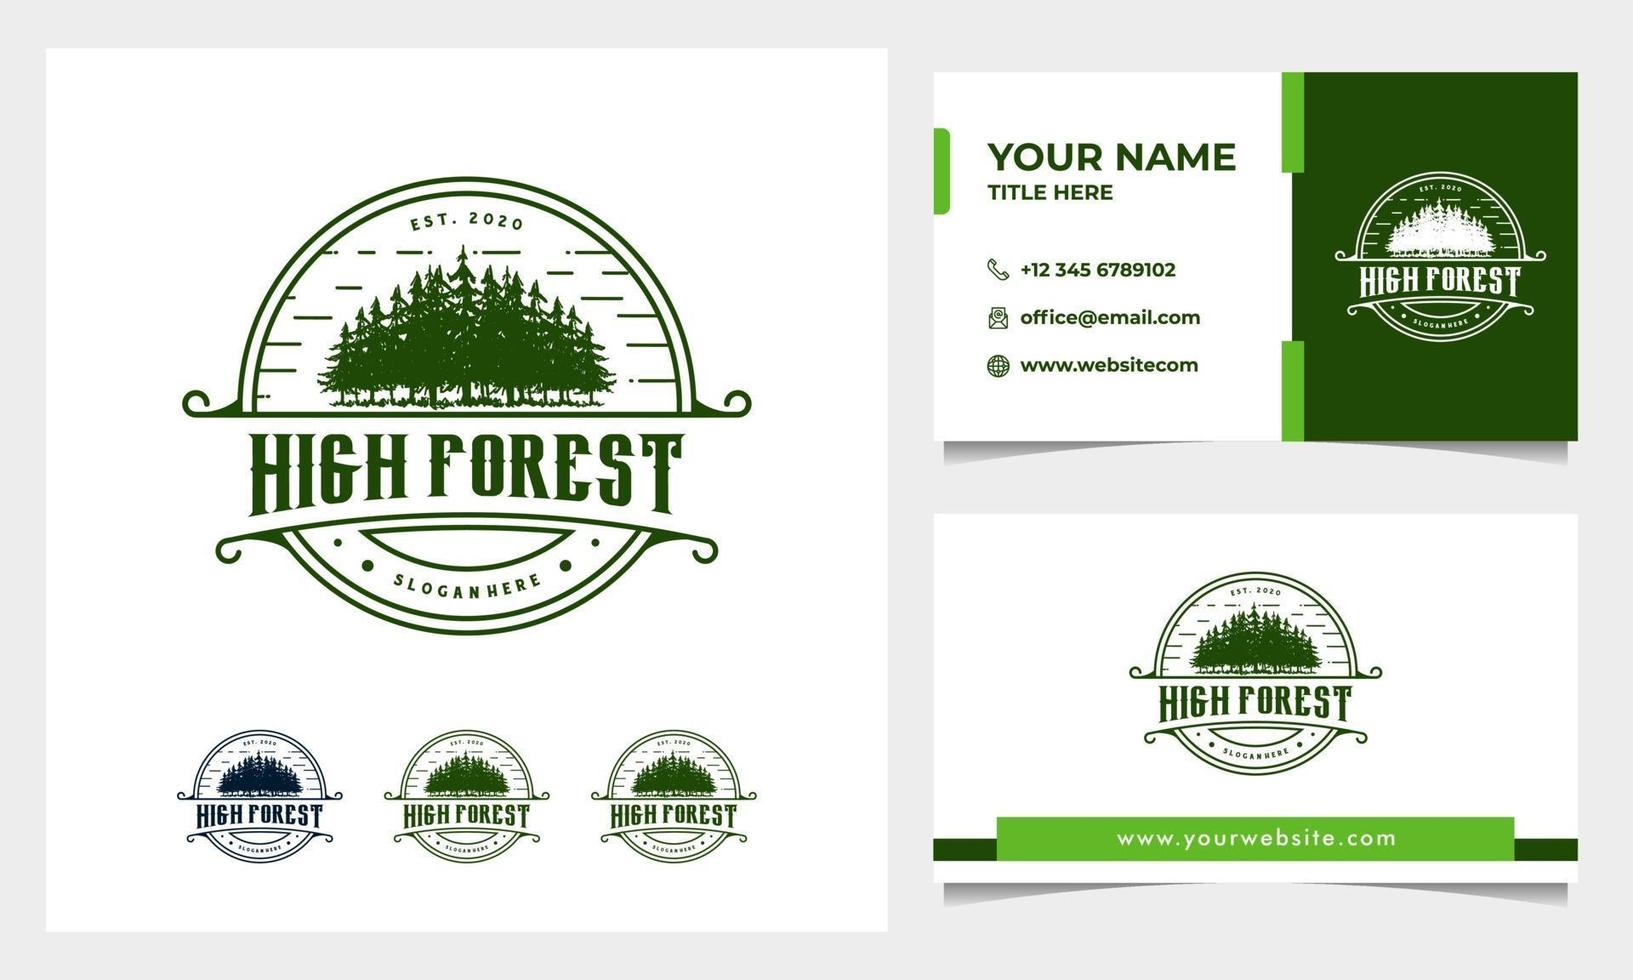 Vintage Pine, hand drawn forest Logo design vector with business card